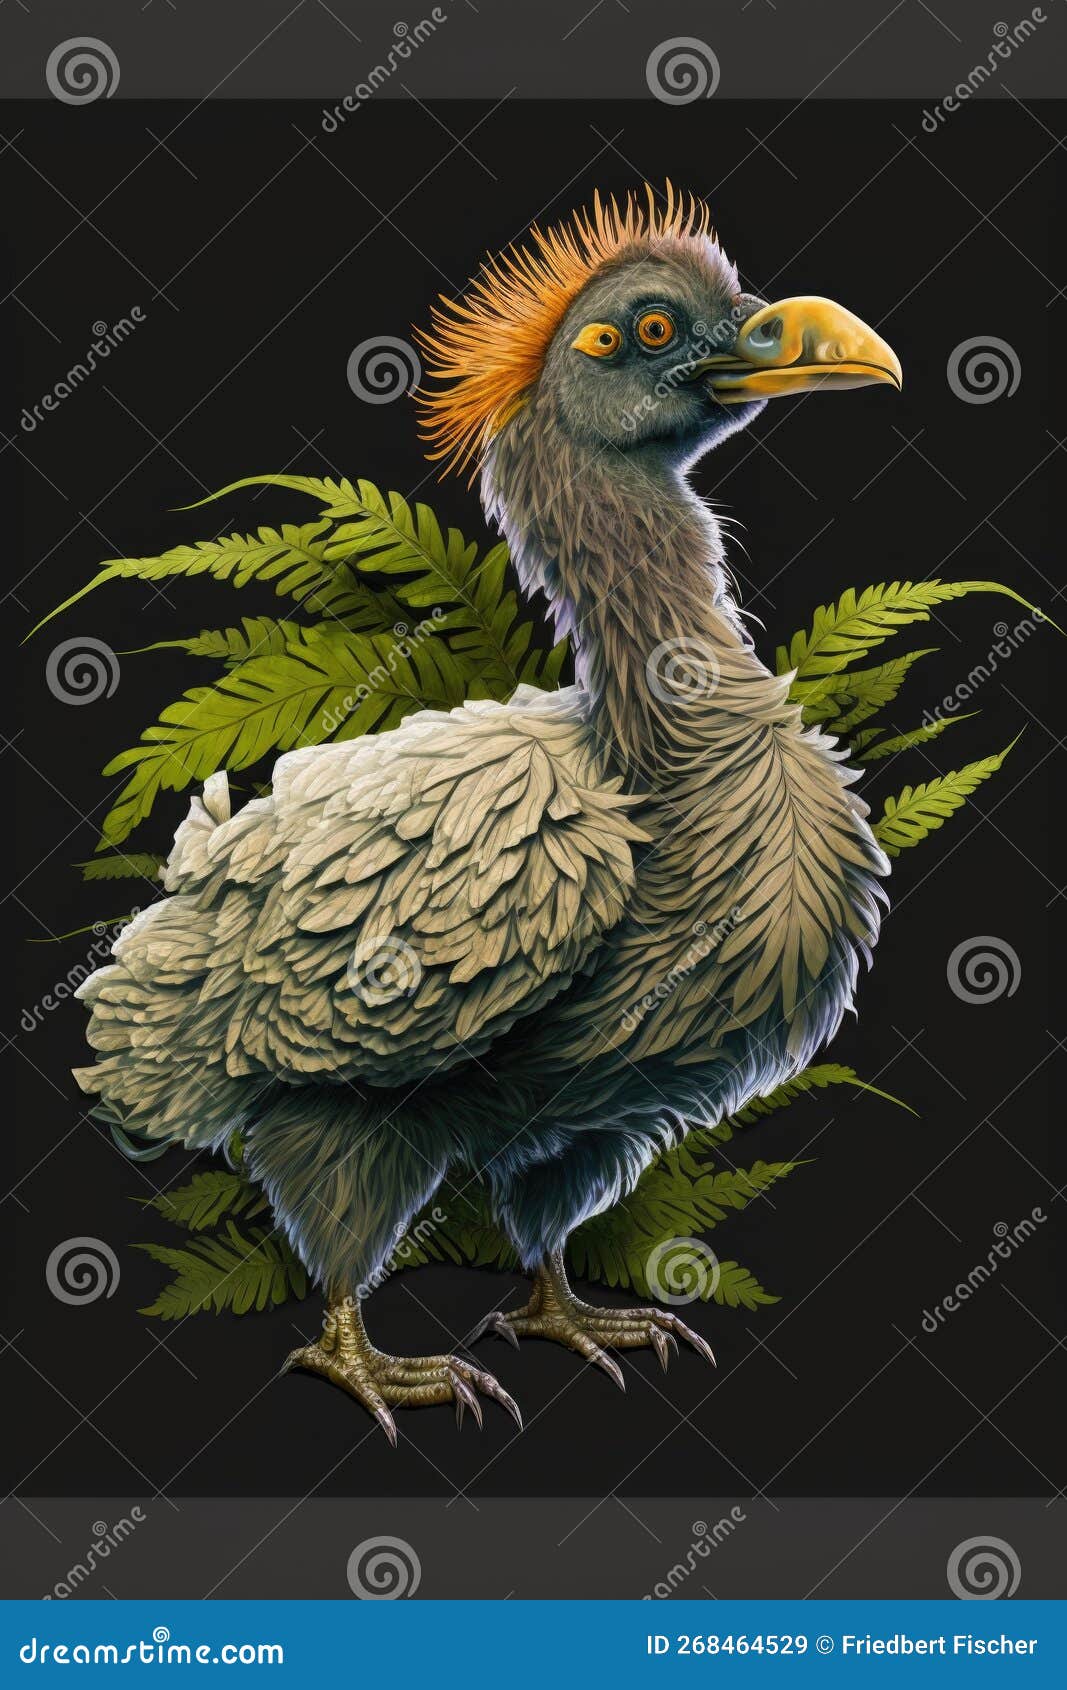 An Extinct Dront, Dodo Bird, or Raphus Cucullatus in Latin. Imaginary  Illustration with Fern Plants on Black Background Stock Image - Image of  social, james: 268464529